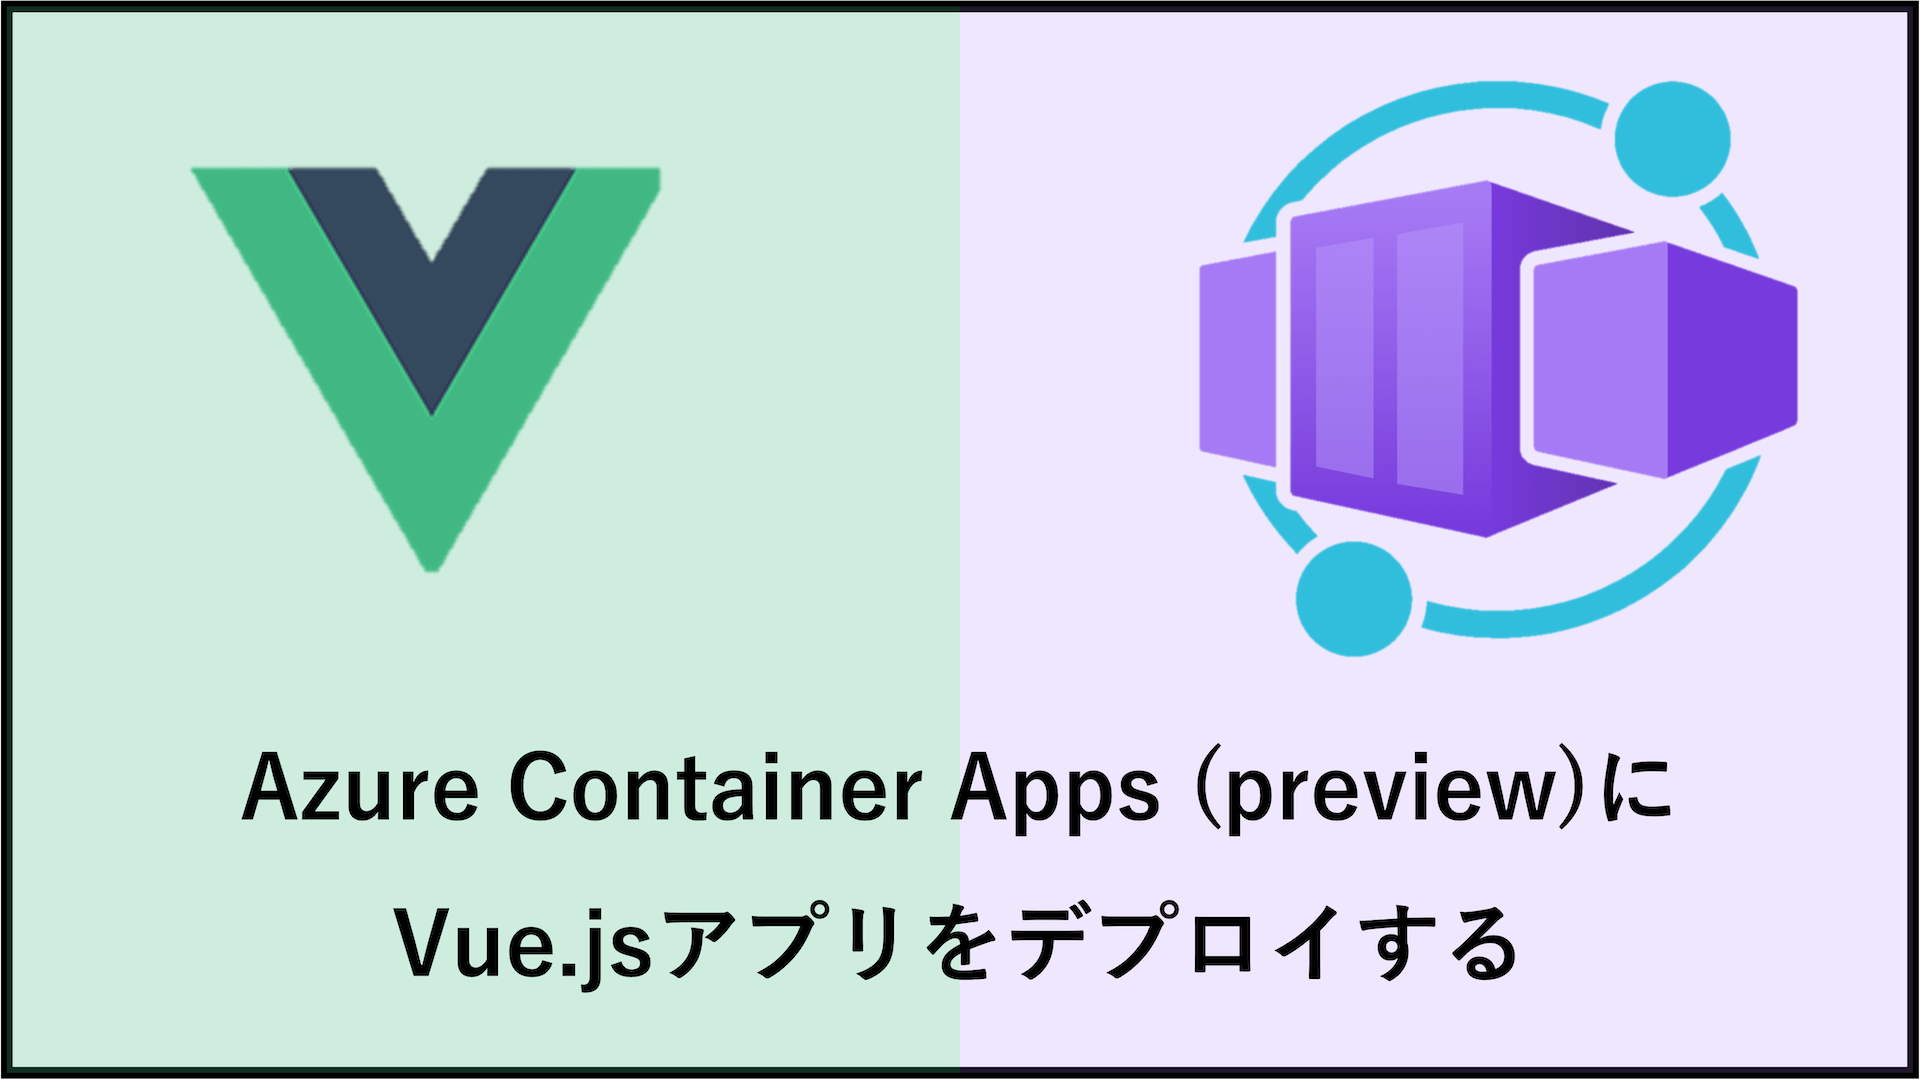 azblob://2022/11/11/eyecatch/2021-12-10-deploy-vue-js-to-azure-container-apps-preview-000.png